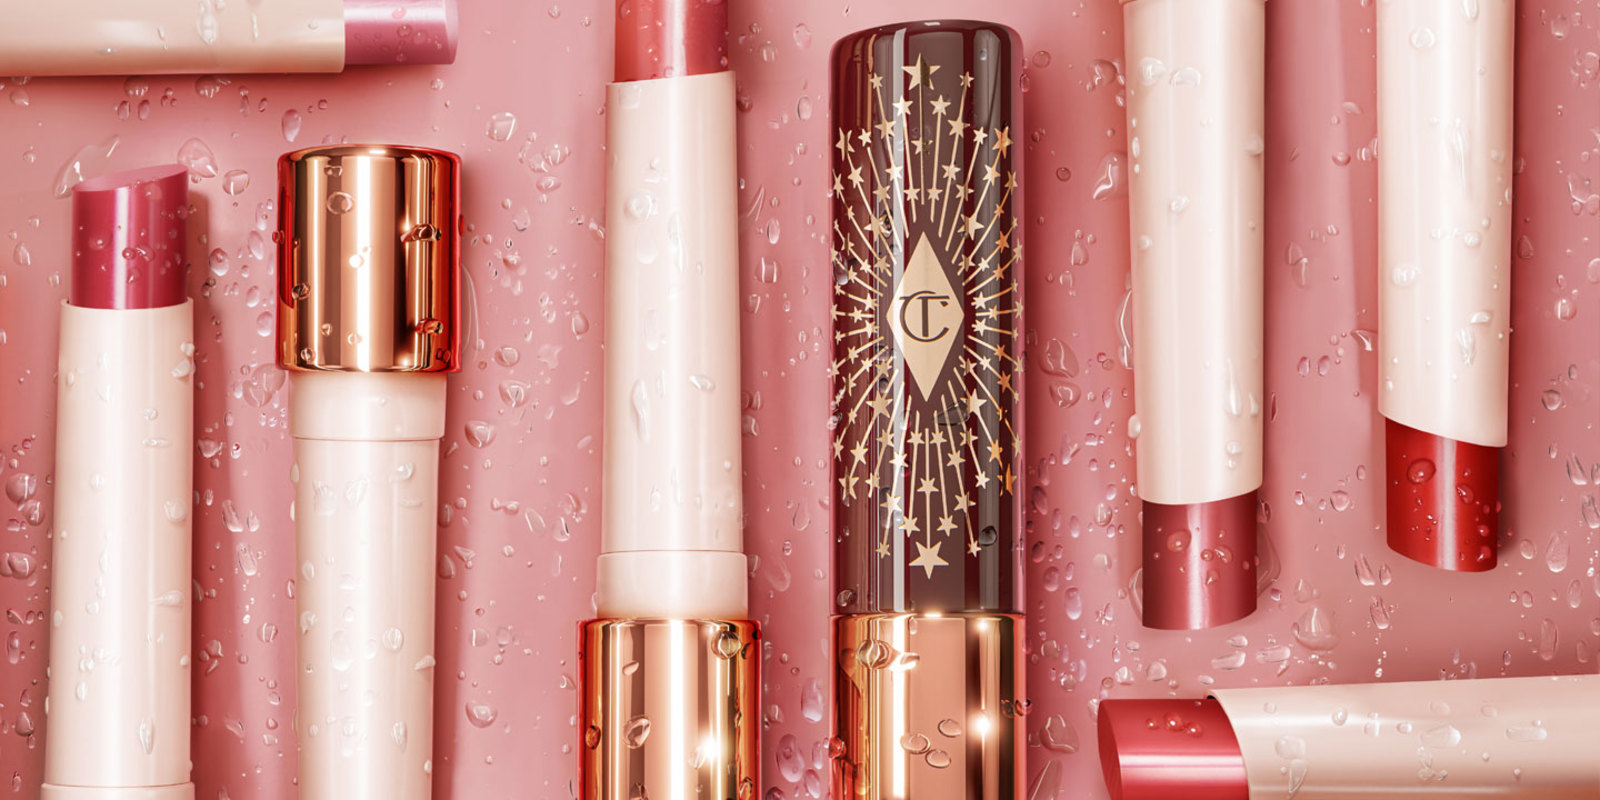 A collection of open, moisturising, high-shine lipstick balms in shades of red, pink, purple, brown, peach, and coral in white and gold-coloured tubes with black-coloured lids with gold-coloured stars printed all over.